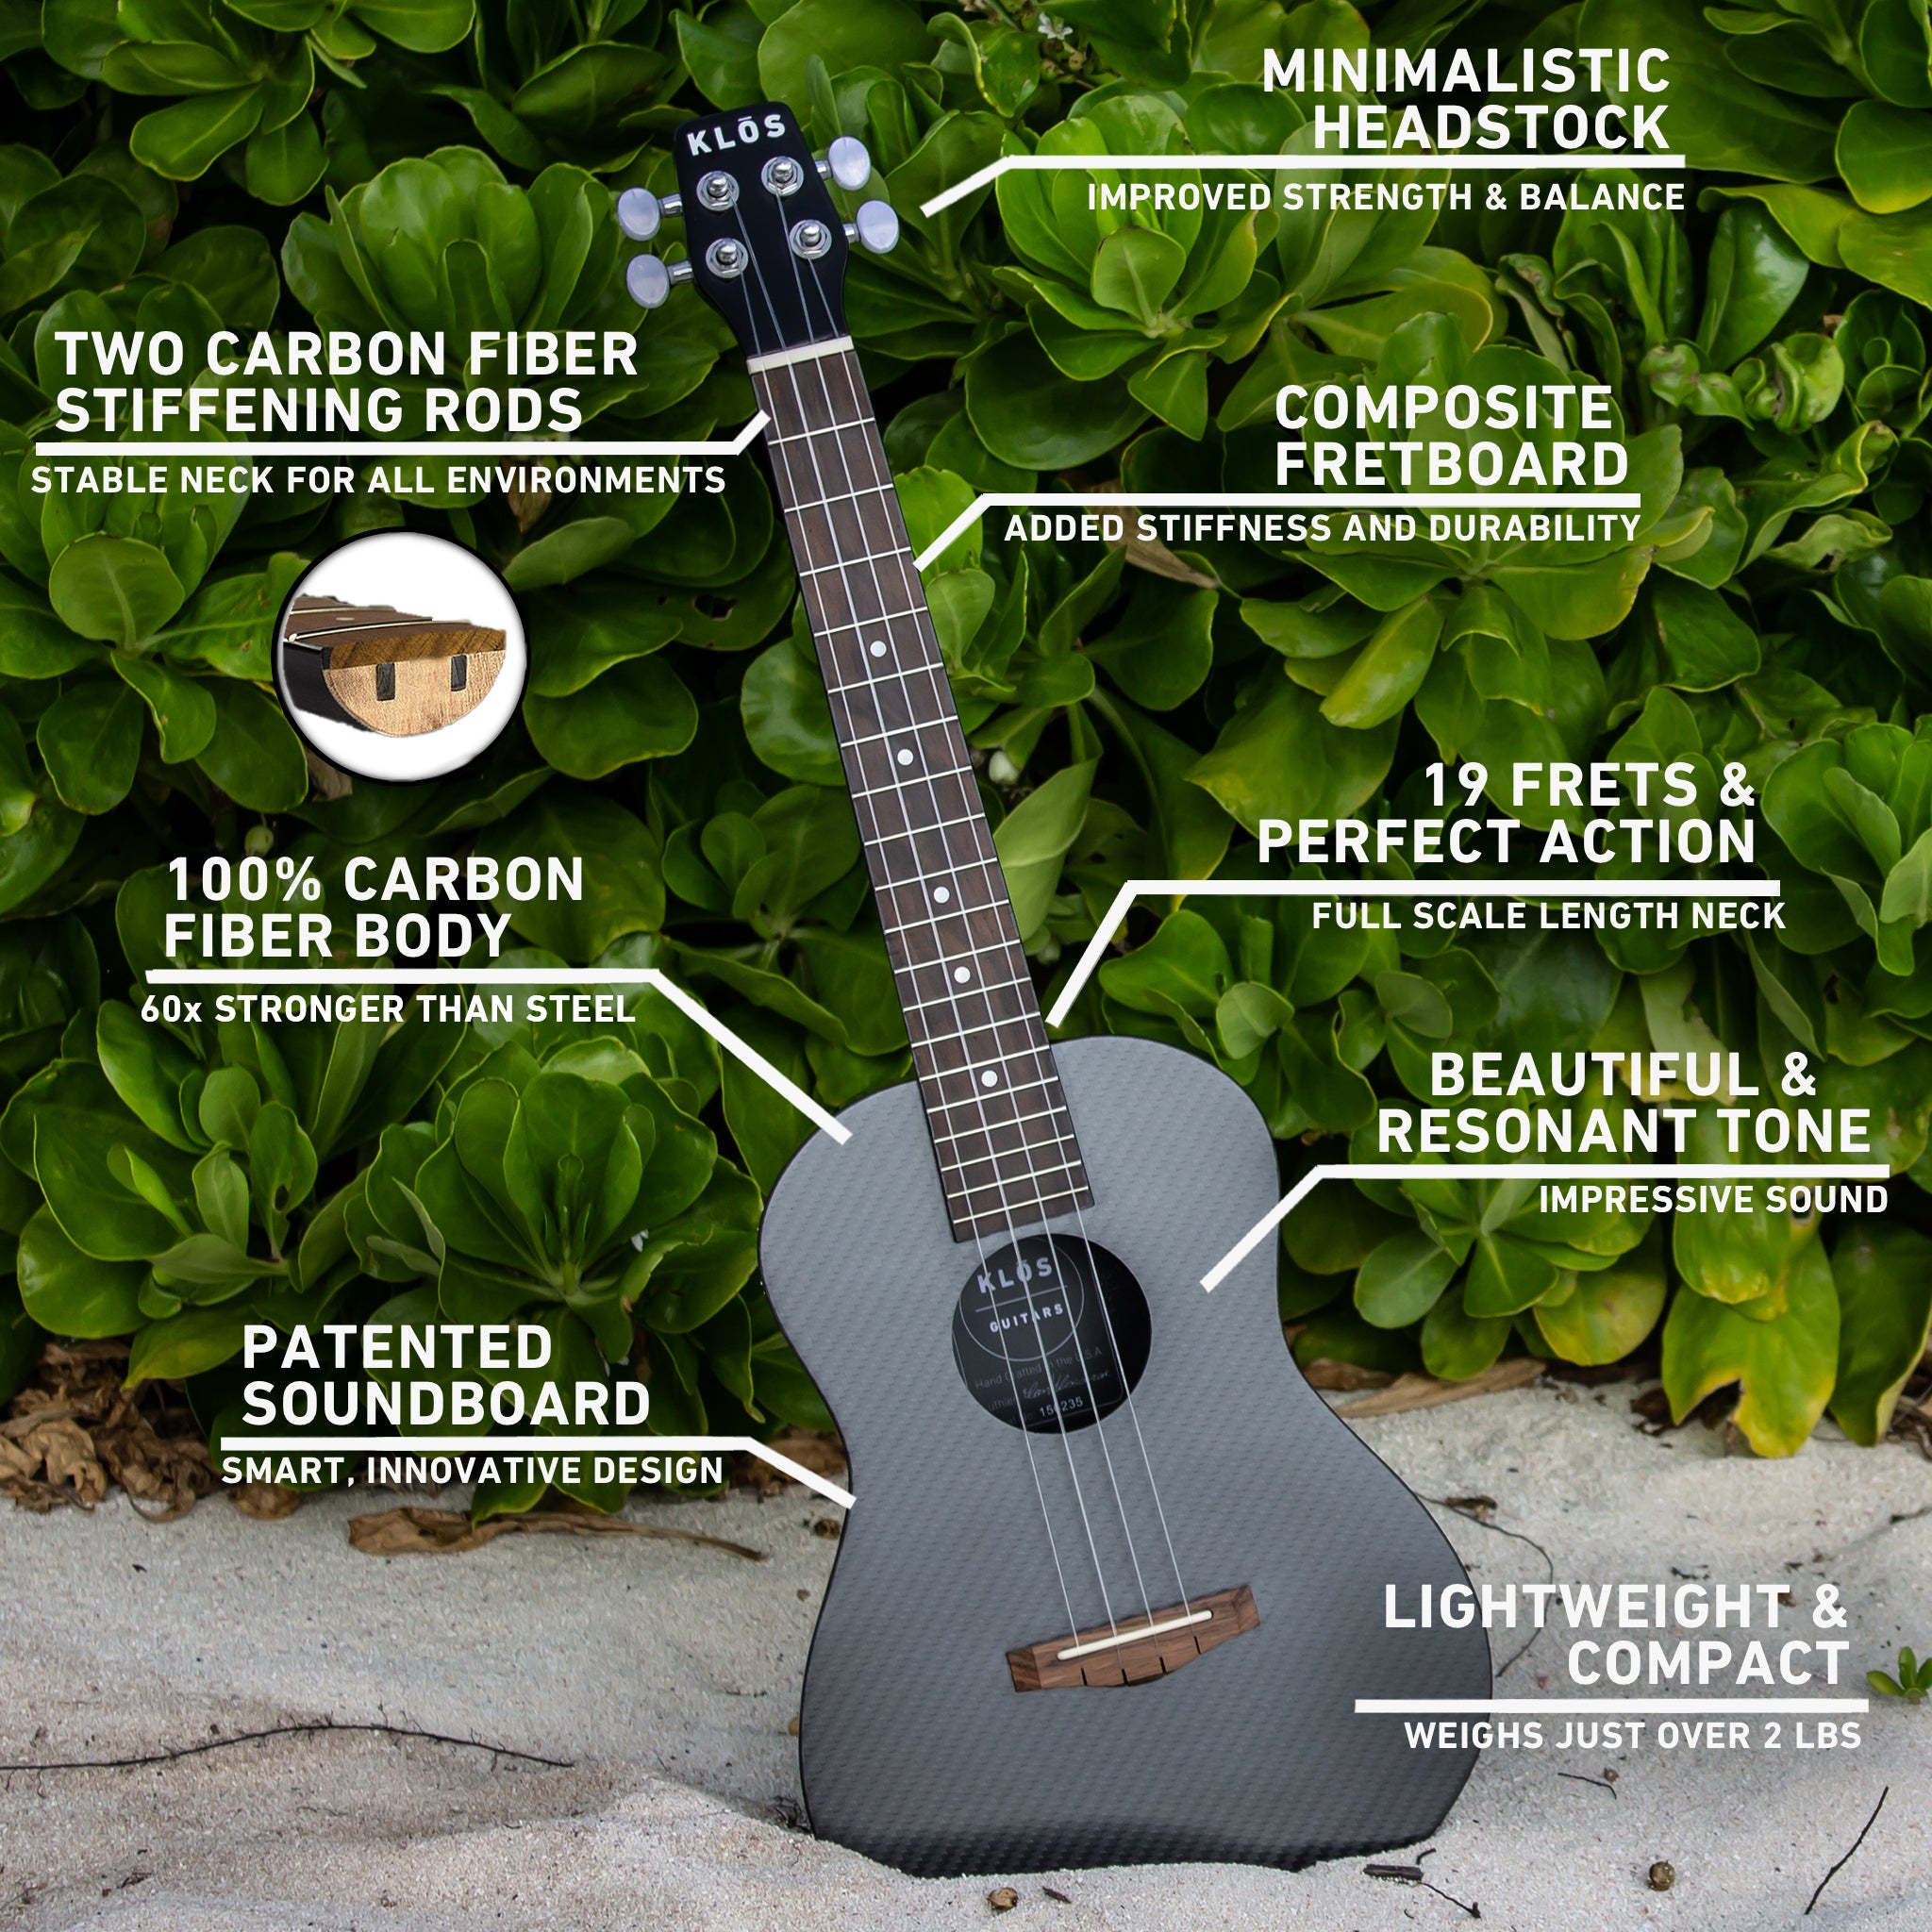 Our ukulele is lightweight, compact, durable and plays great. 